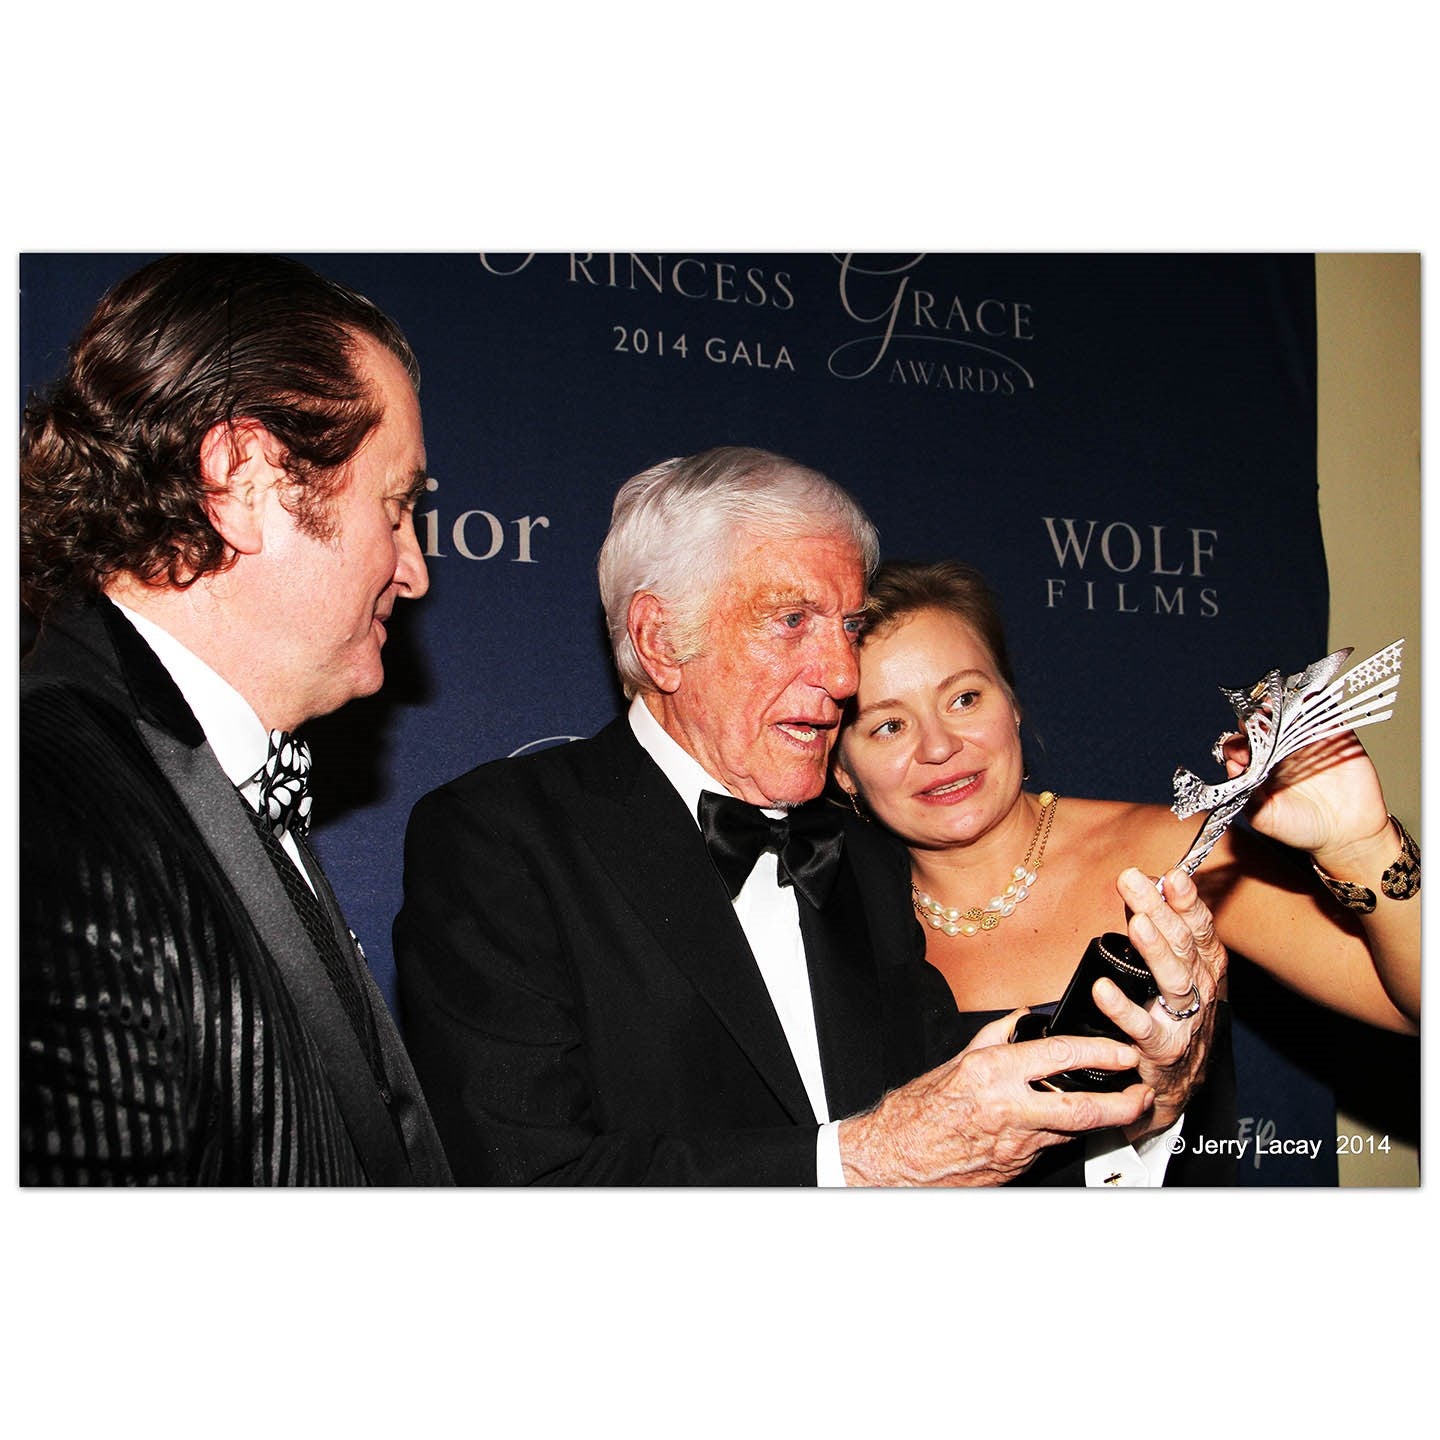 Alex & Maria Soldier presenting Dick Van Dyke with Princess Grace Award, designed and created by Alex Soldier. Jewelry: Alex Soldier. Dress: Alex Teih. Photo: Jerry Lacay.